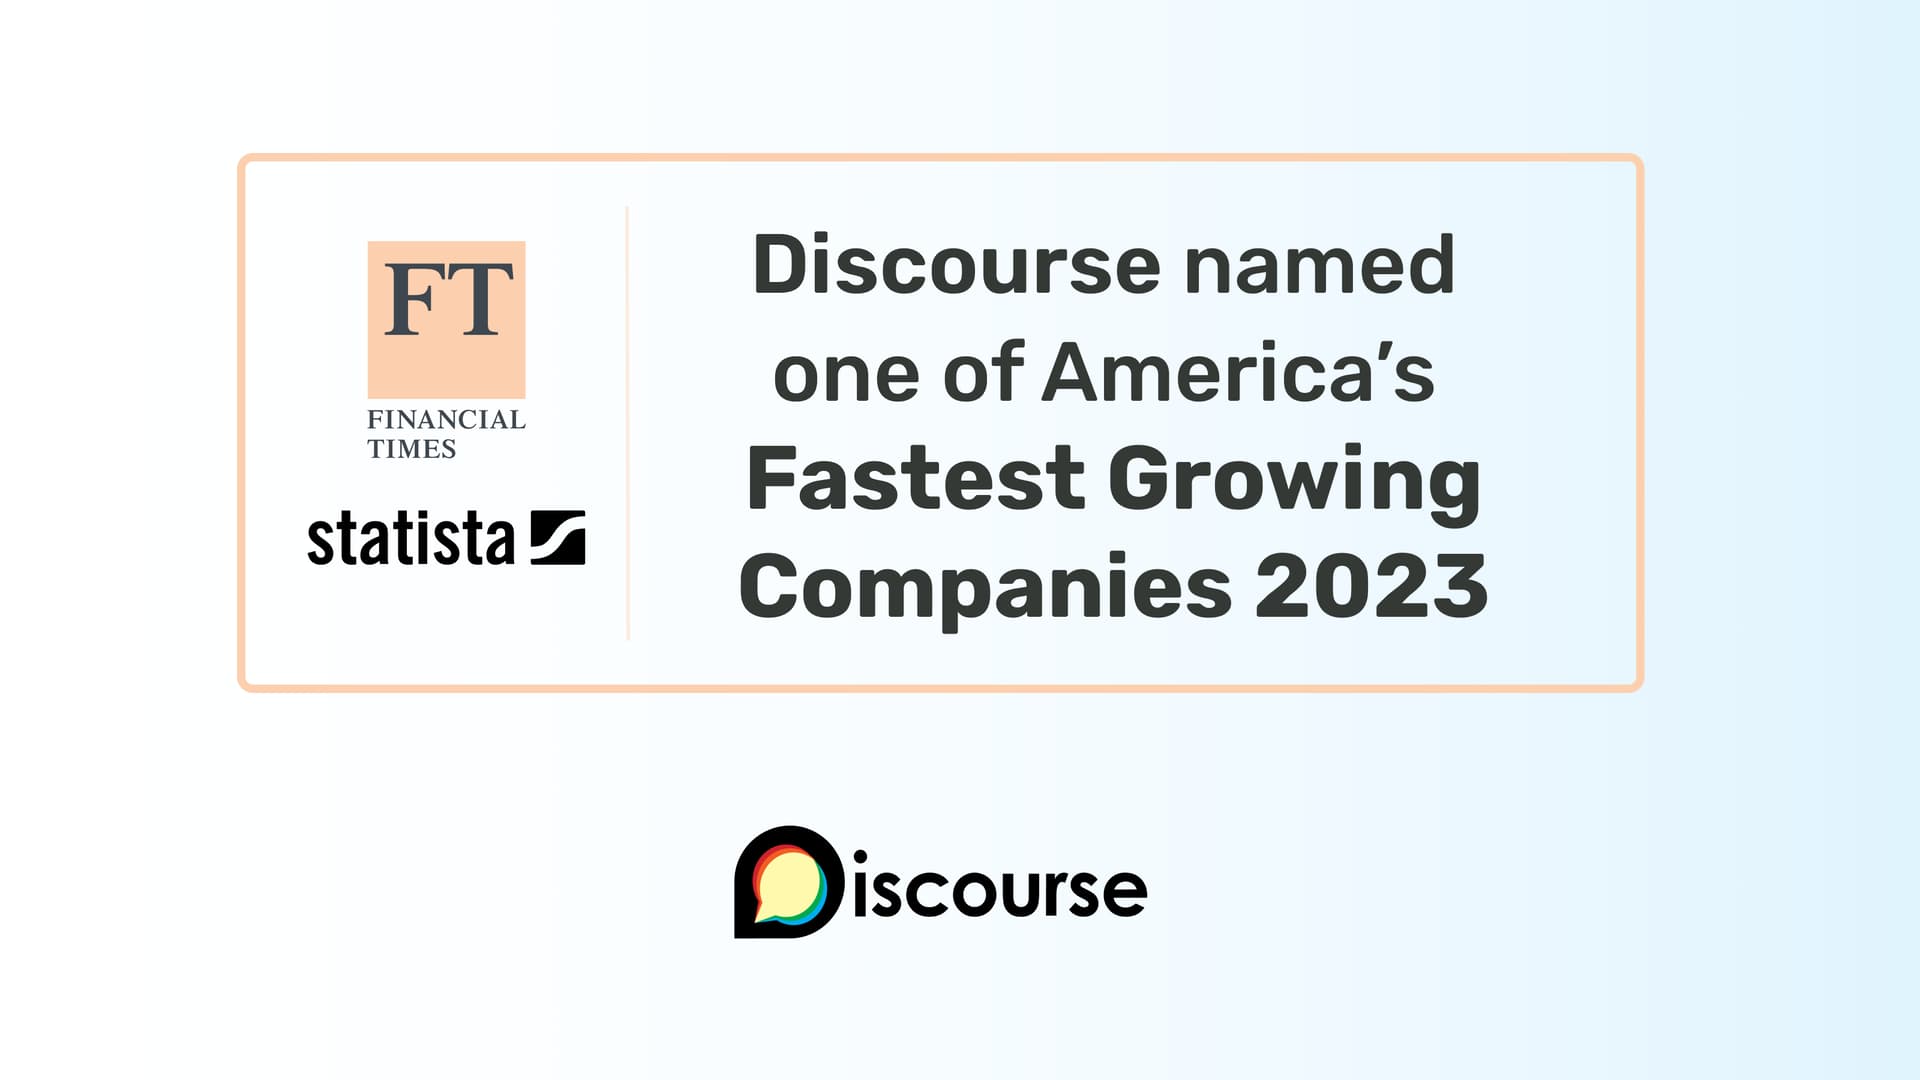 Discourse Named One of the Americas' Fastest Growing Companies